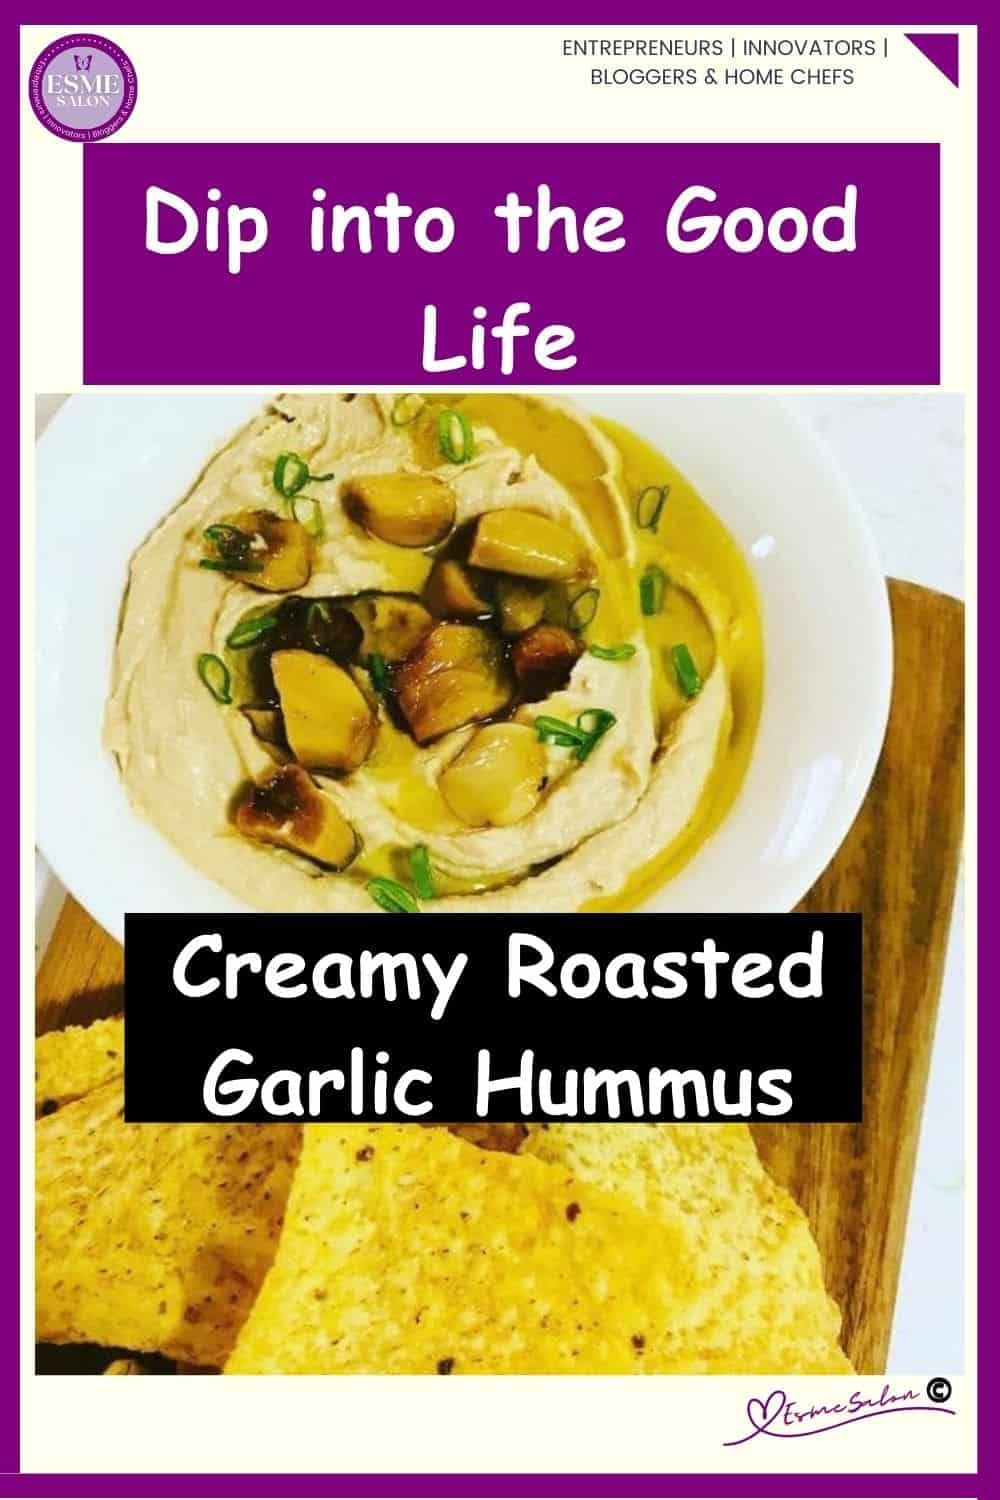 an image of a white bowl filled with Creamy Garlic Roasted Hummus on wooden table with some crisps as well